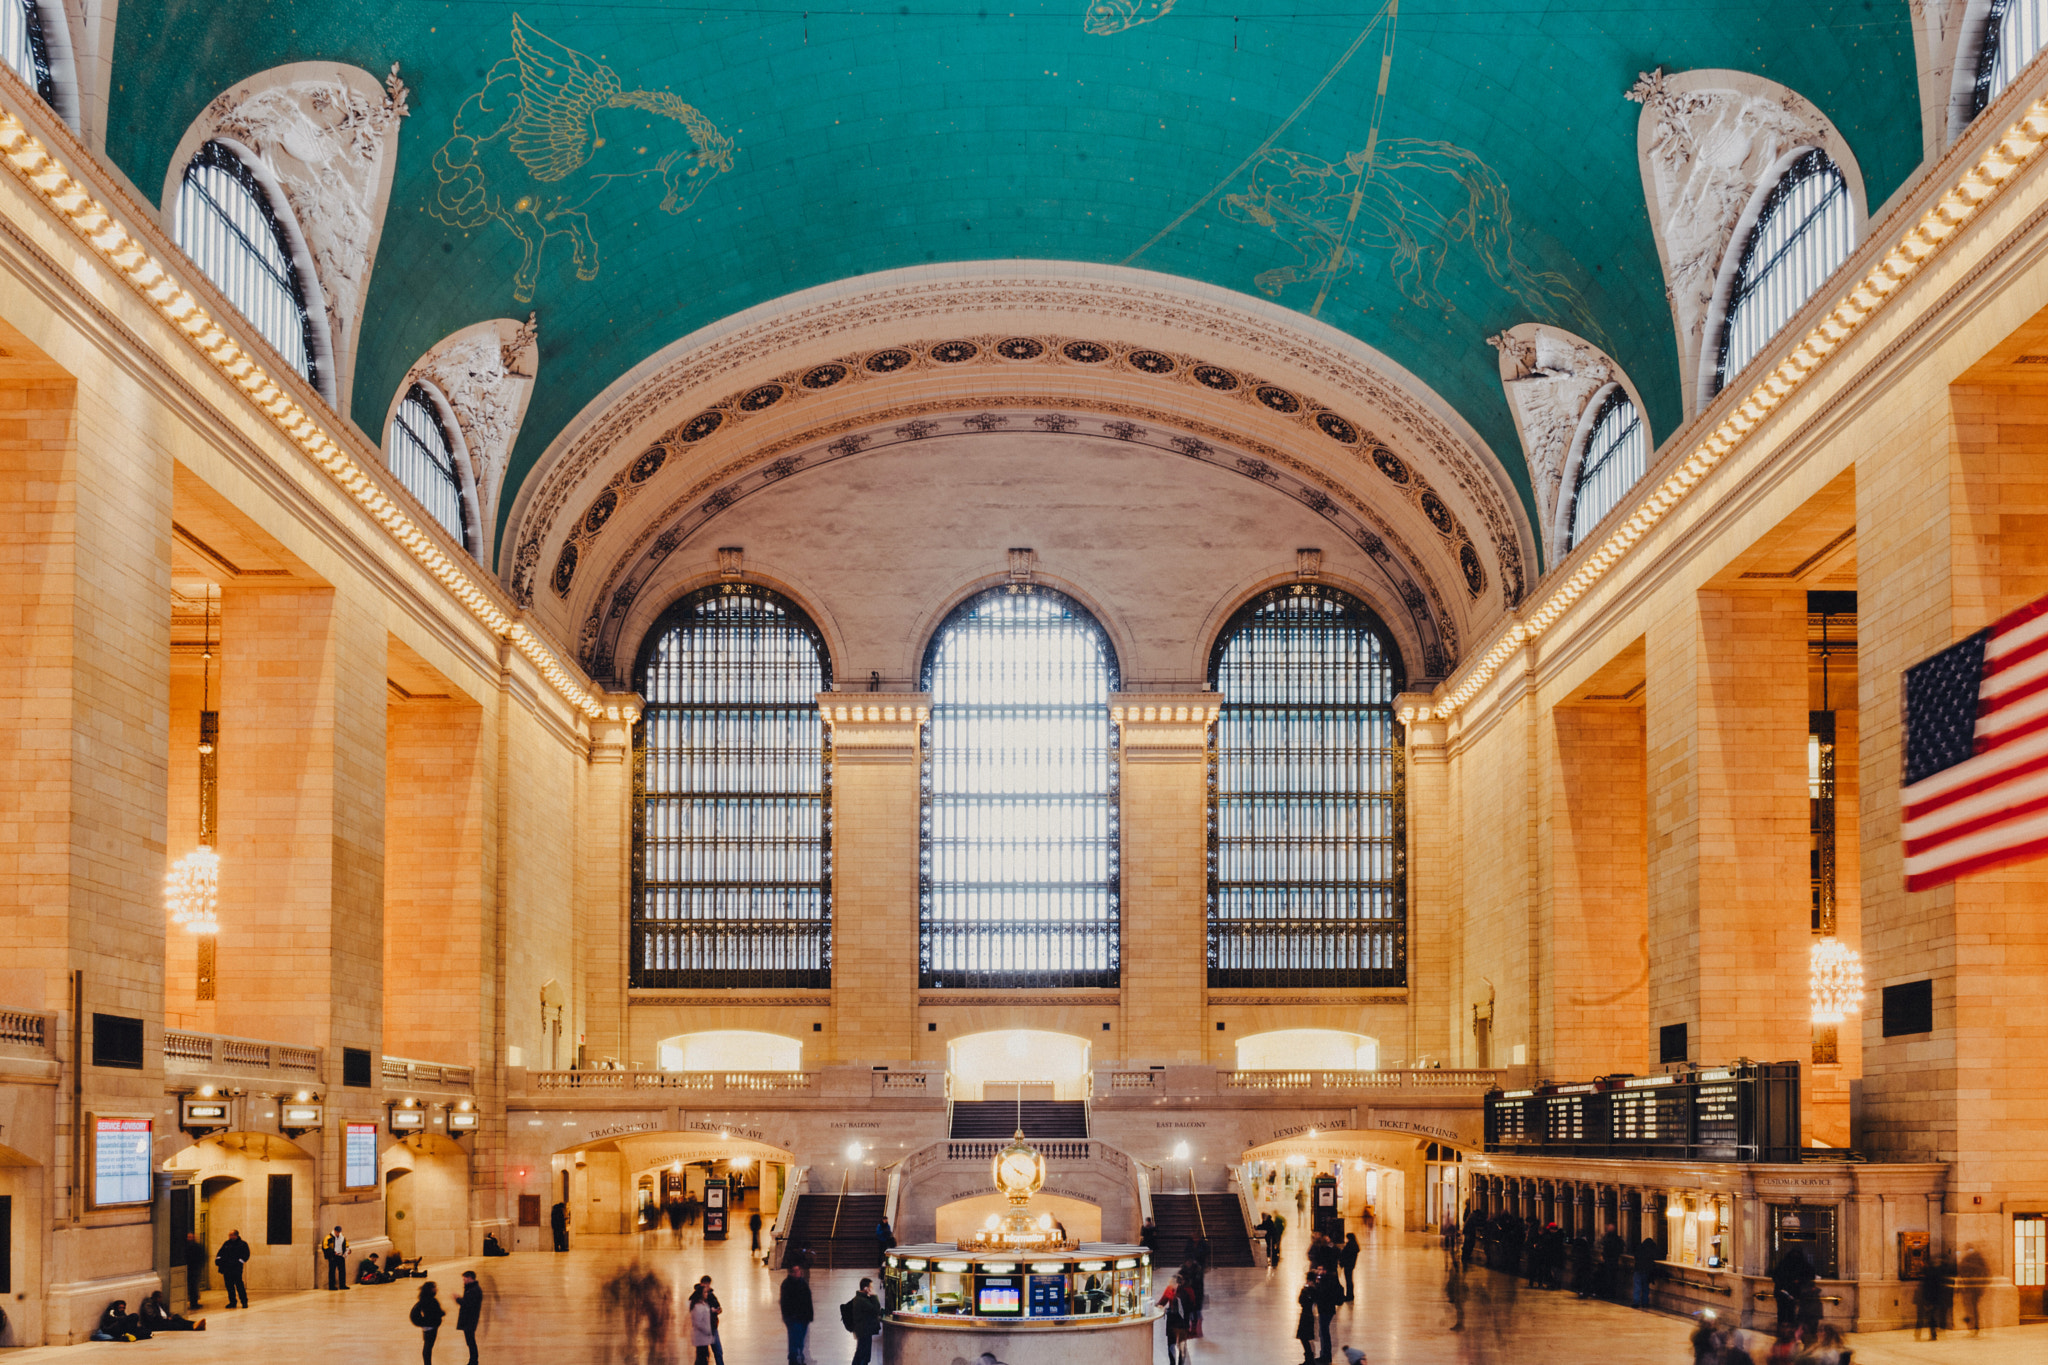 Sony a7 II sample photo. Grand central terminal photography